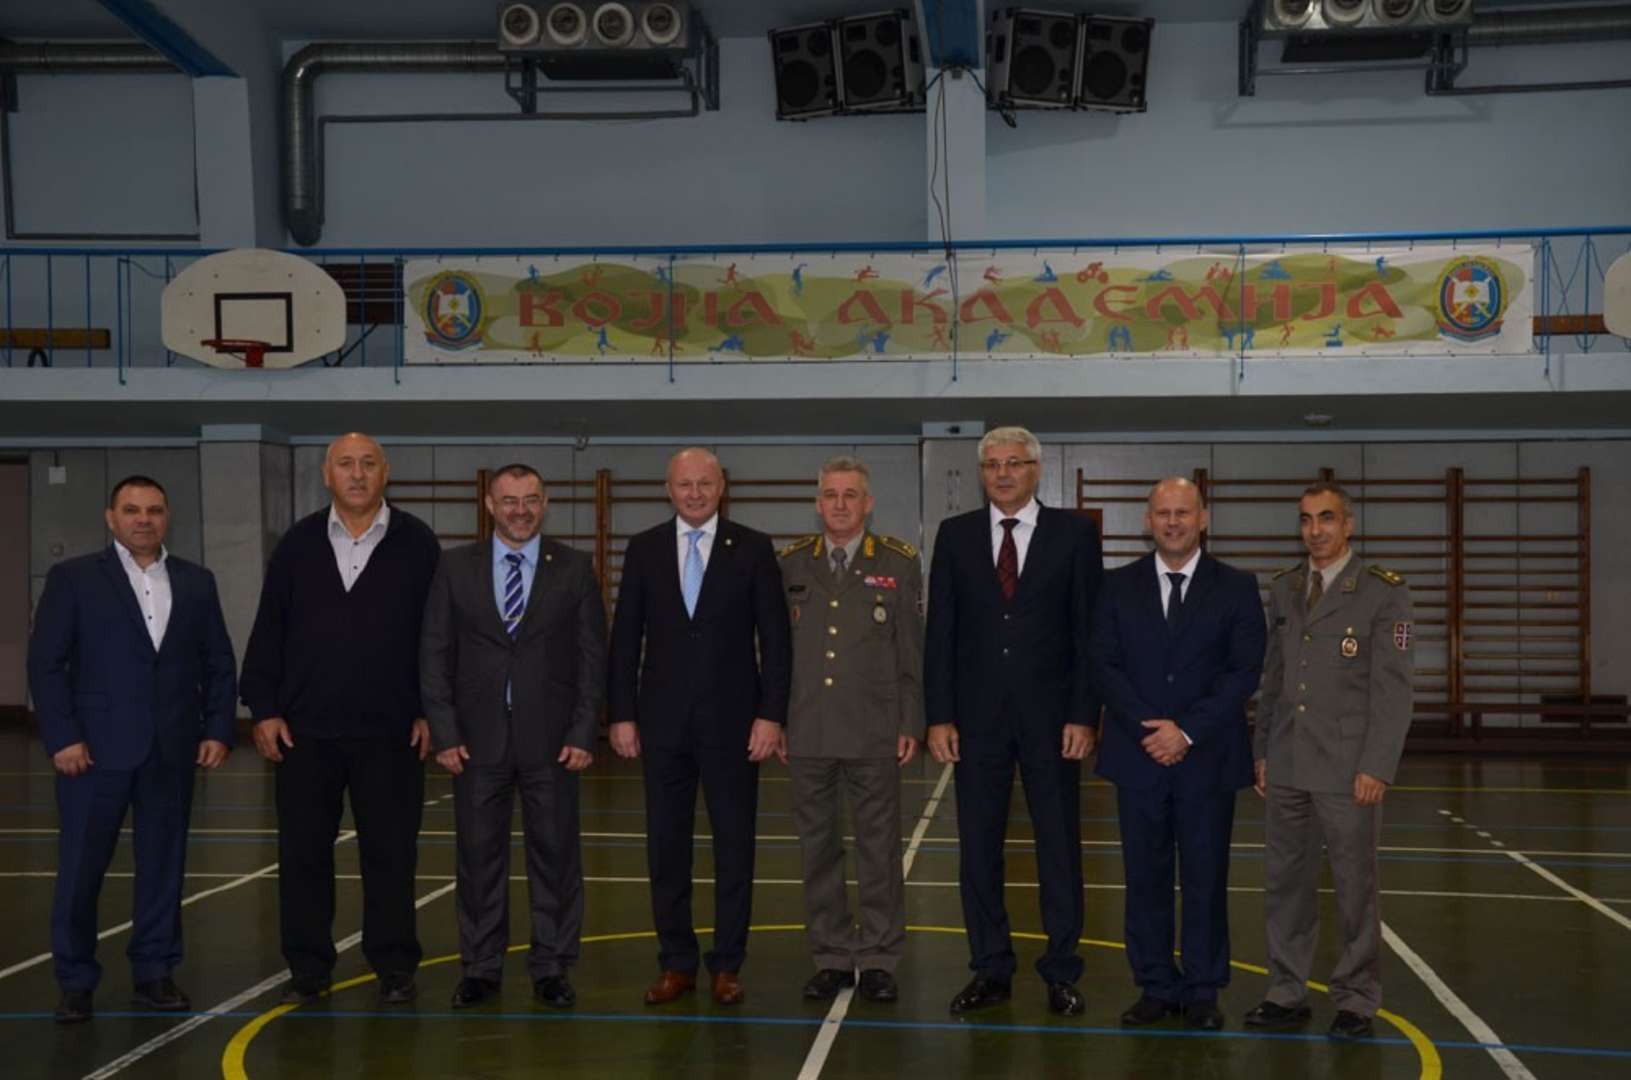 The agreement between the Serbian Judo Federation and the country's Ministry of Defence will be a key one in promoting judo among military personnel ©International Judo Federation